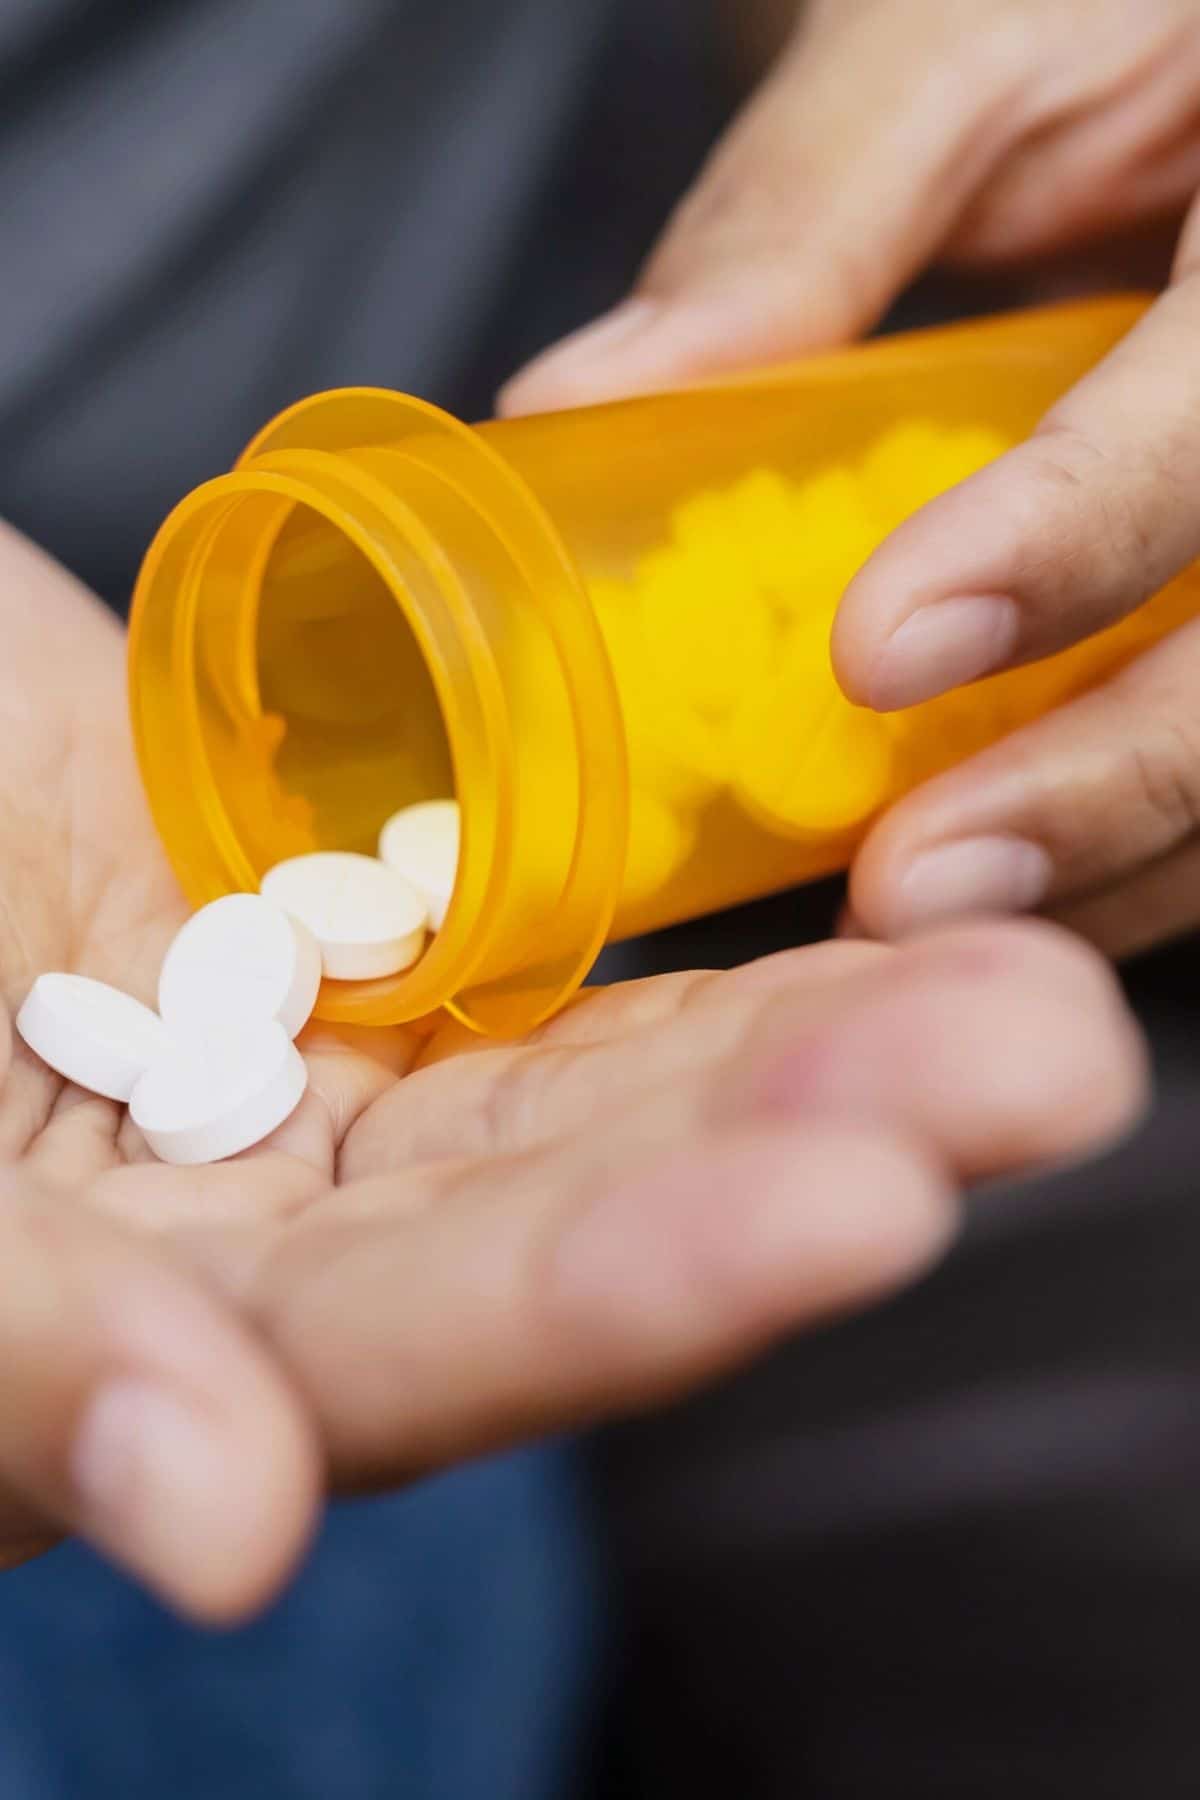 pouring pills out of a medication bottle.